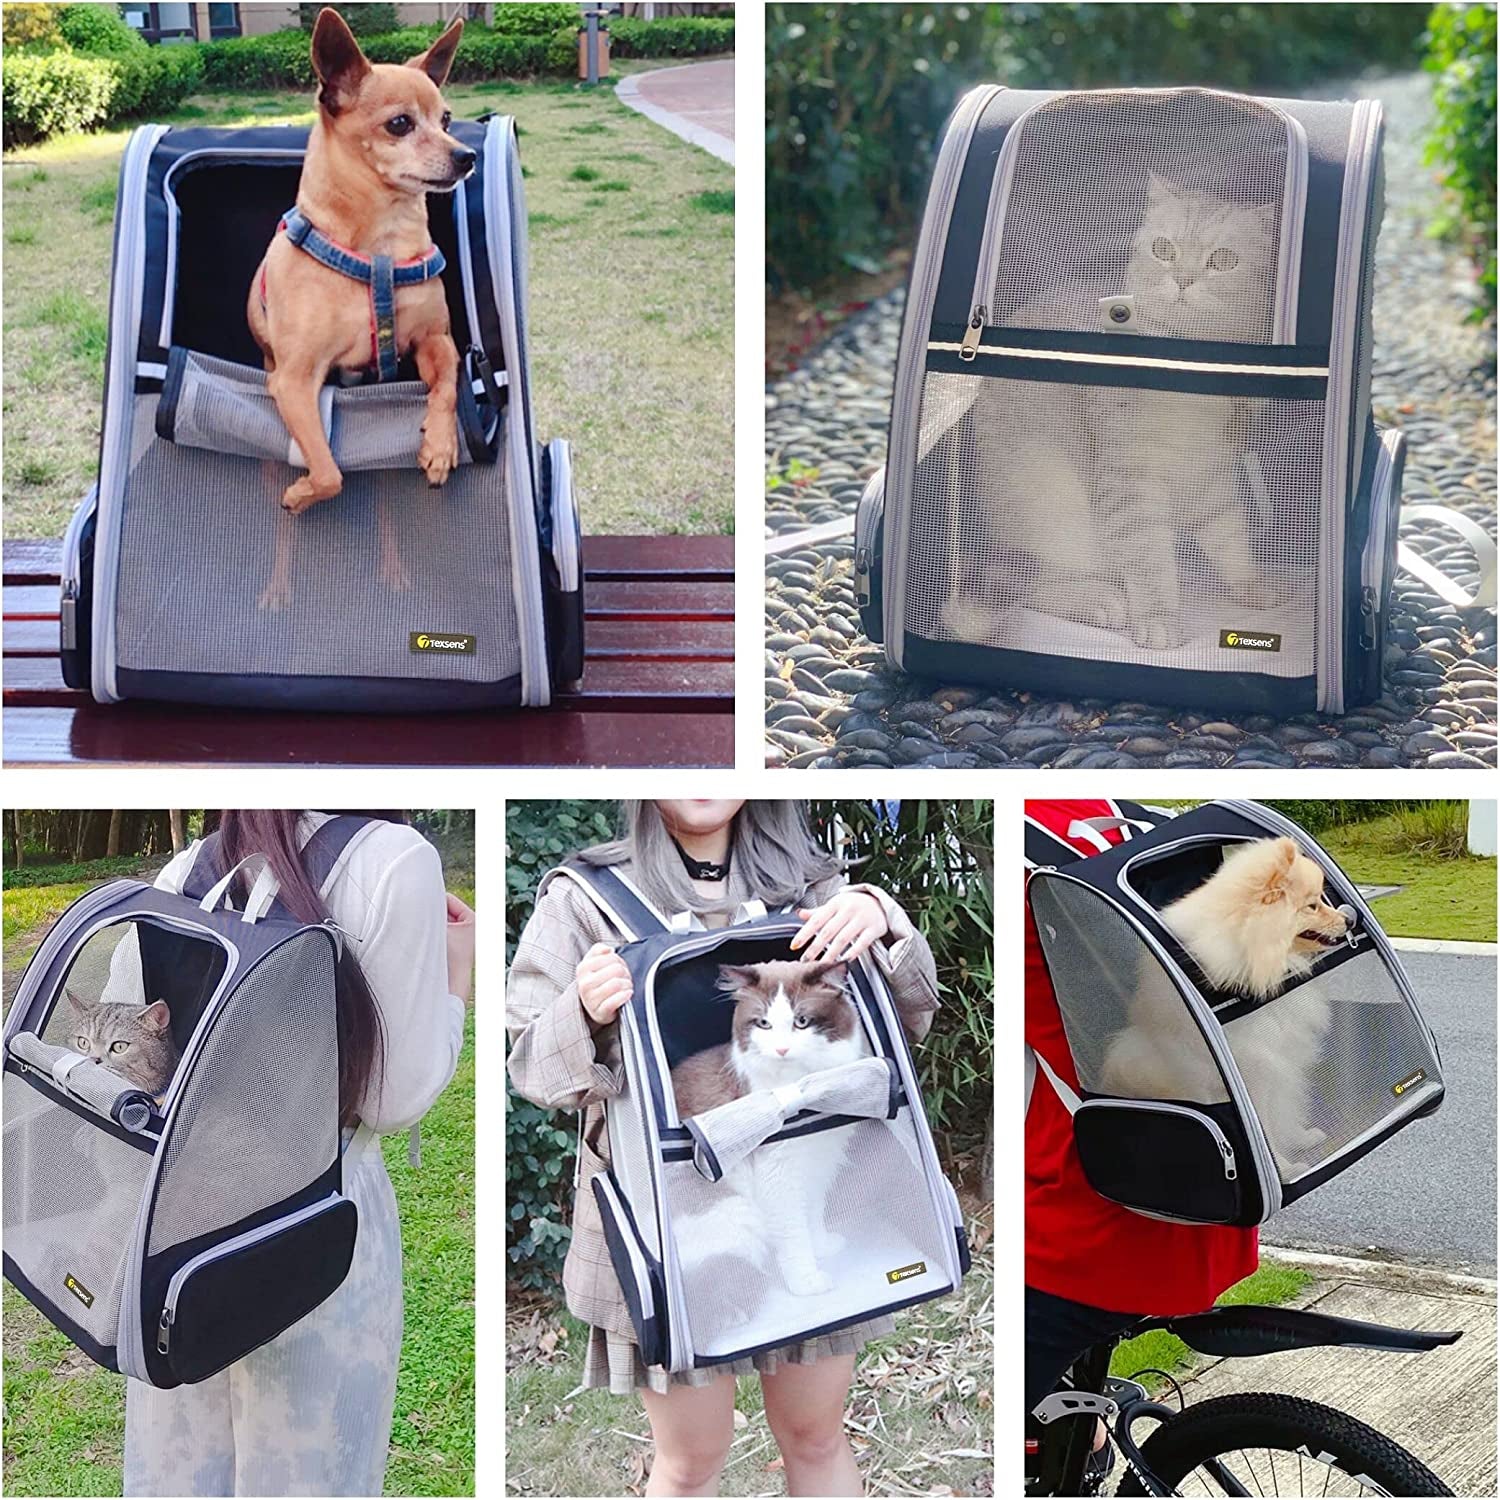 Innovative Bubble Backpack Pet Carrier: for Cats and Dogs, Black